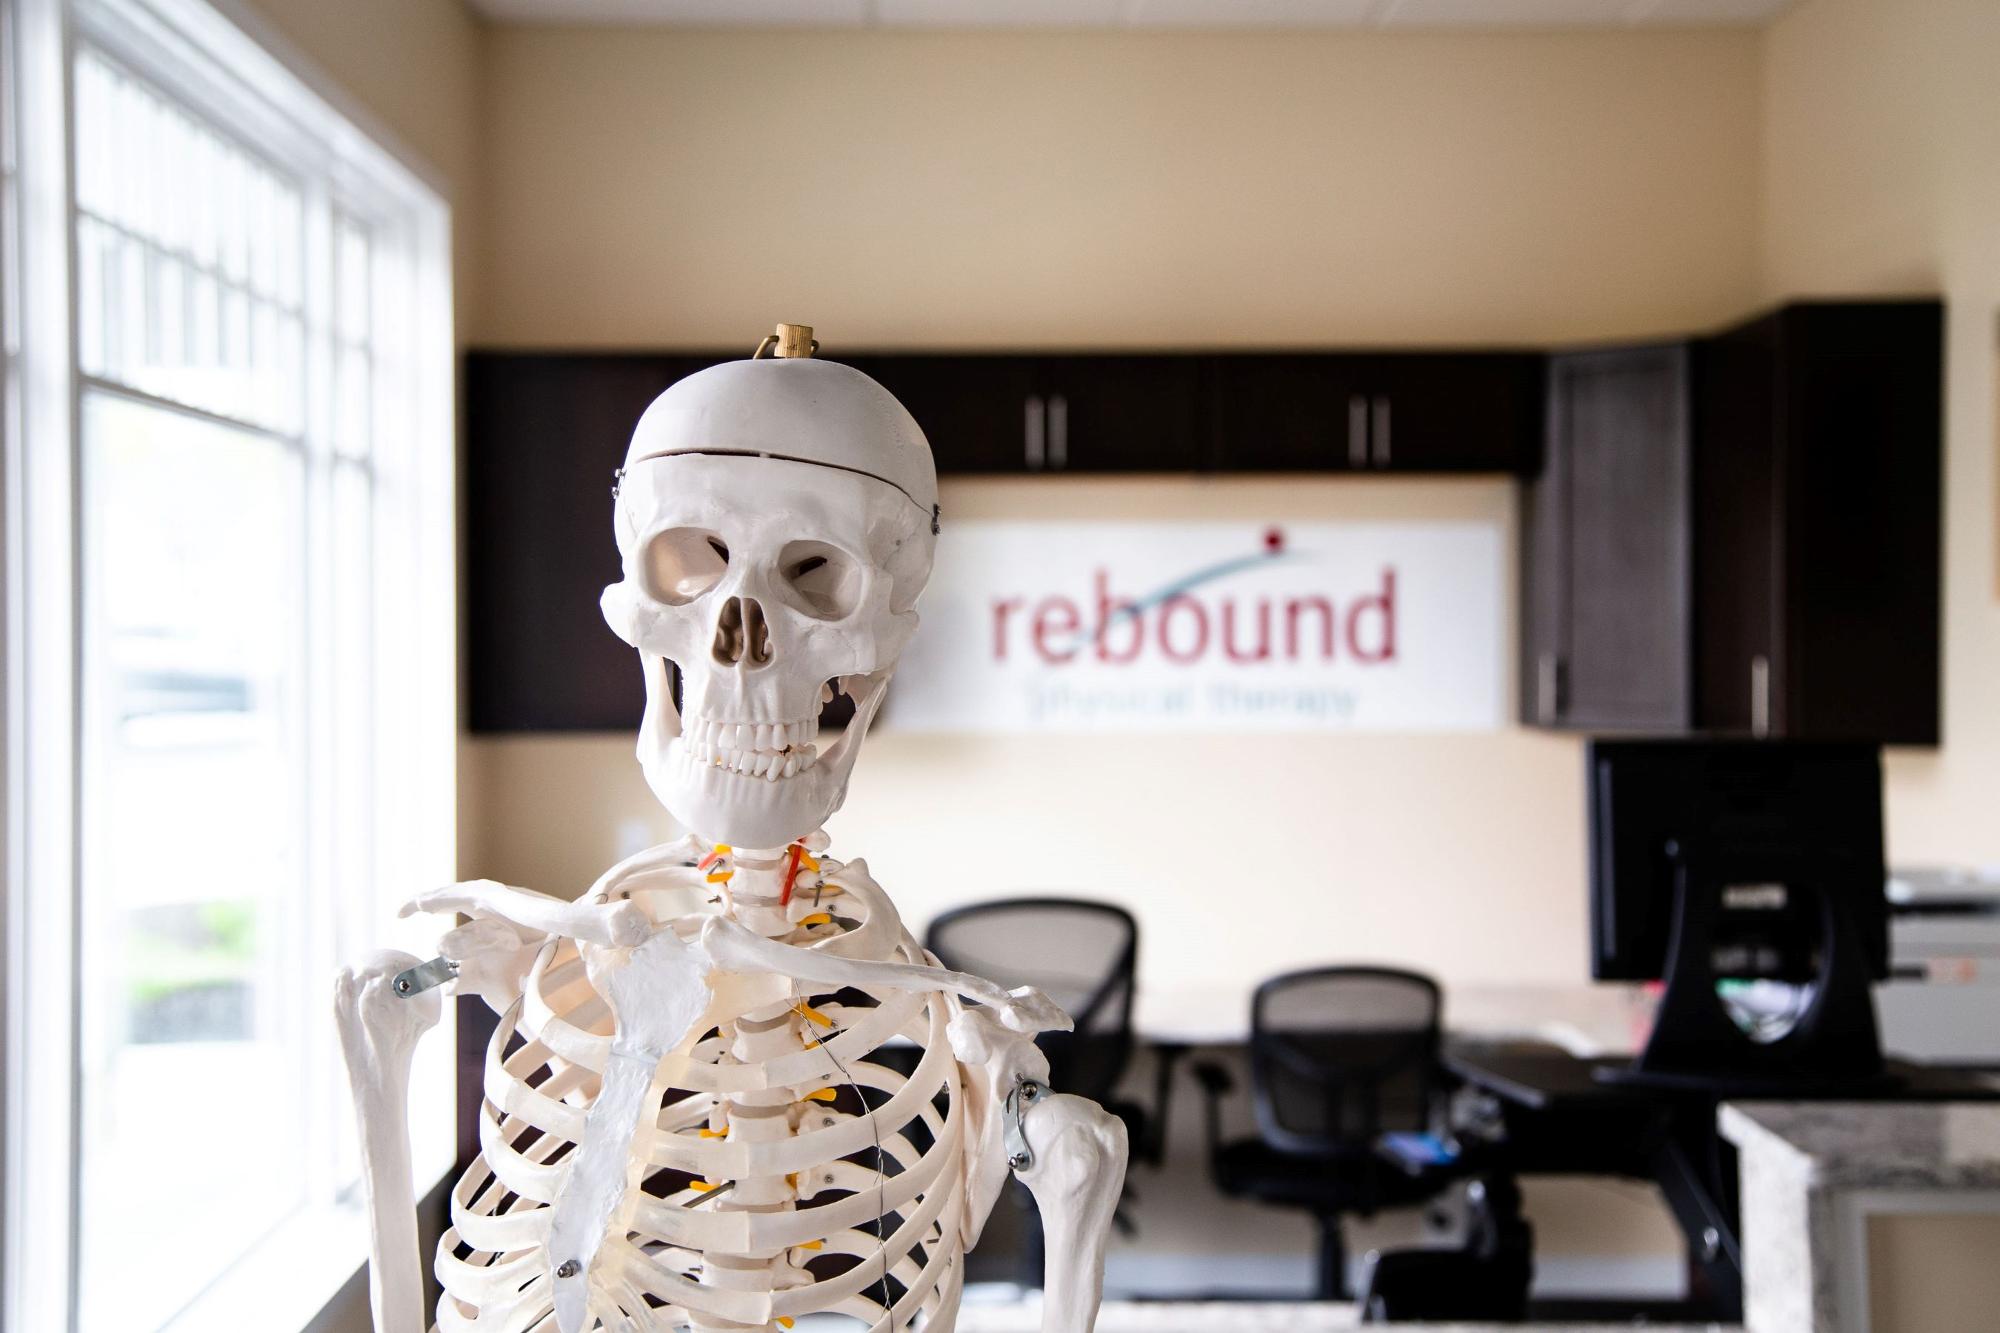 Rebound Physical Therapy Westborough